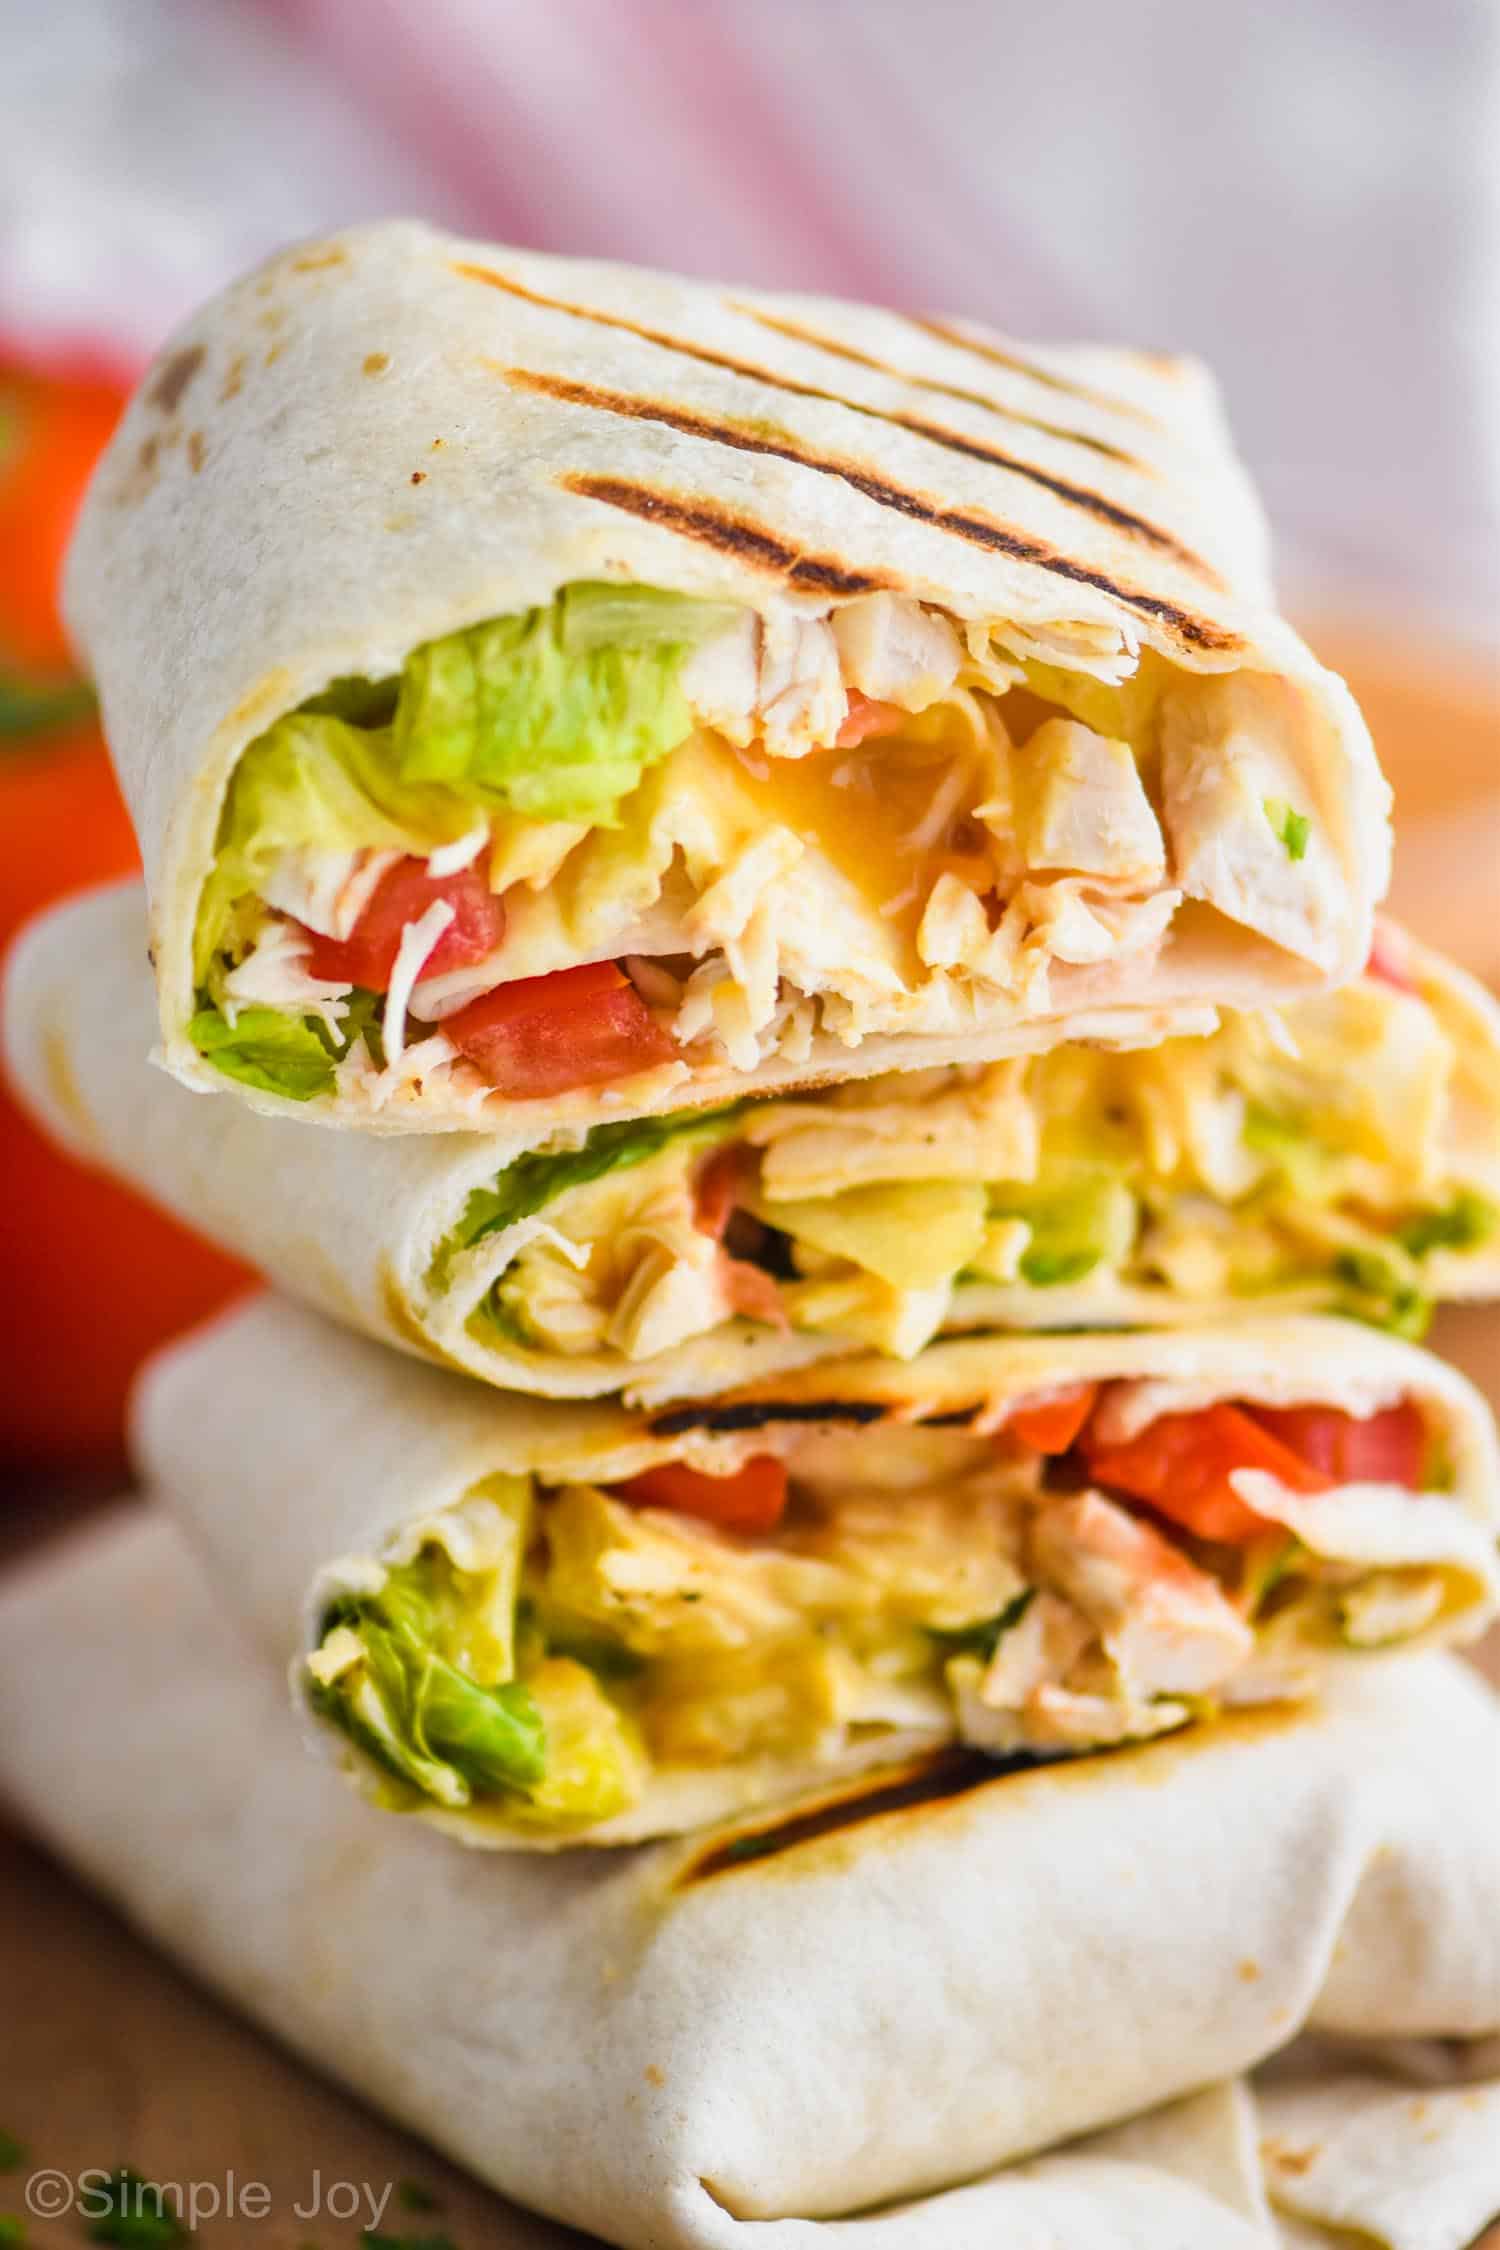 Chicken wrap Recipe and Nutrition - Eat This Much